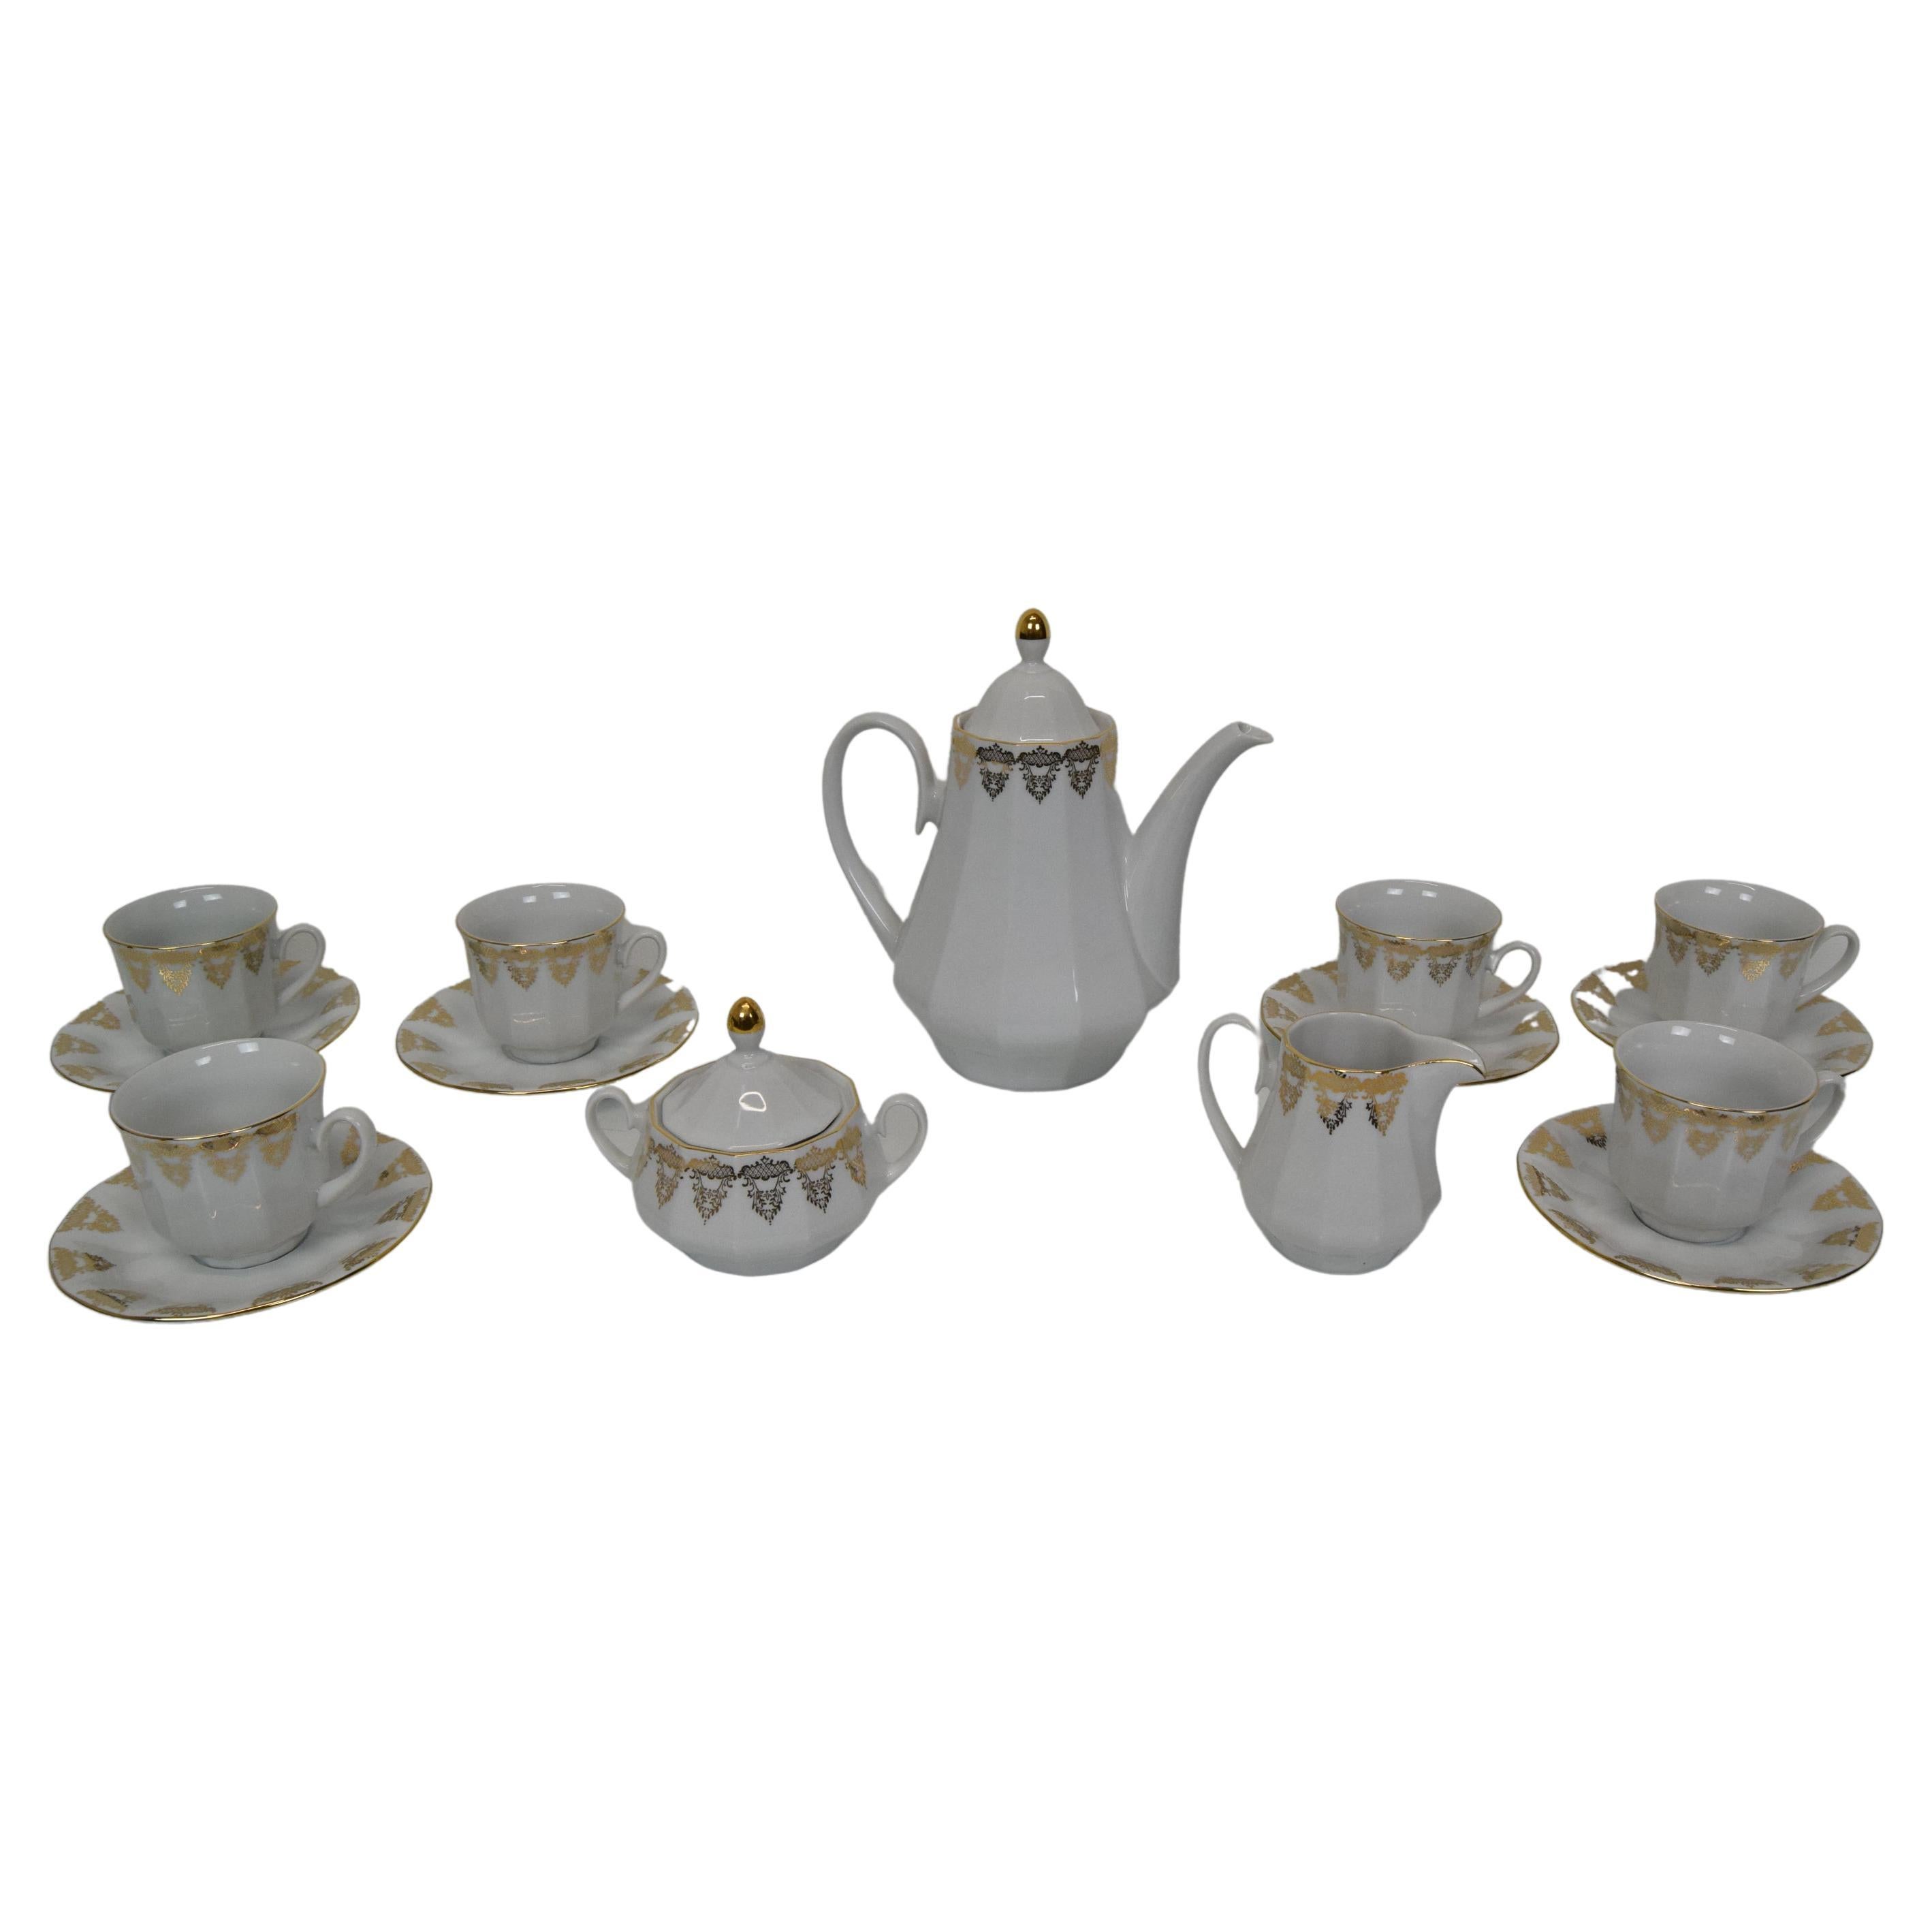 Set Porcelain for Tea or Coffee, Carlsbad Porcealin by Company Epiag D.F For Sale